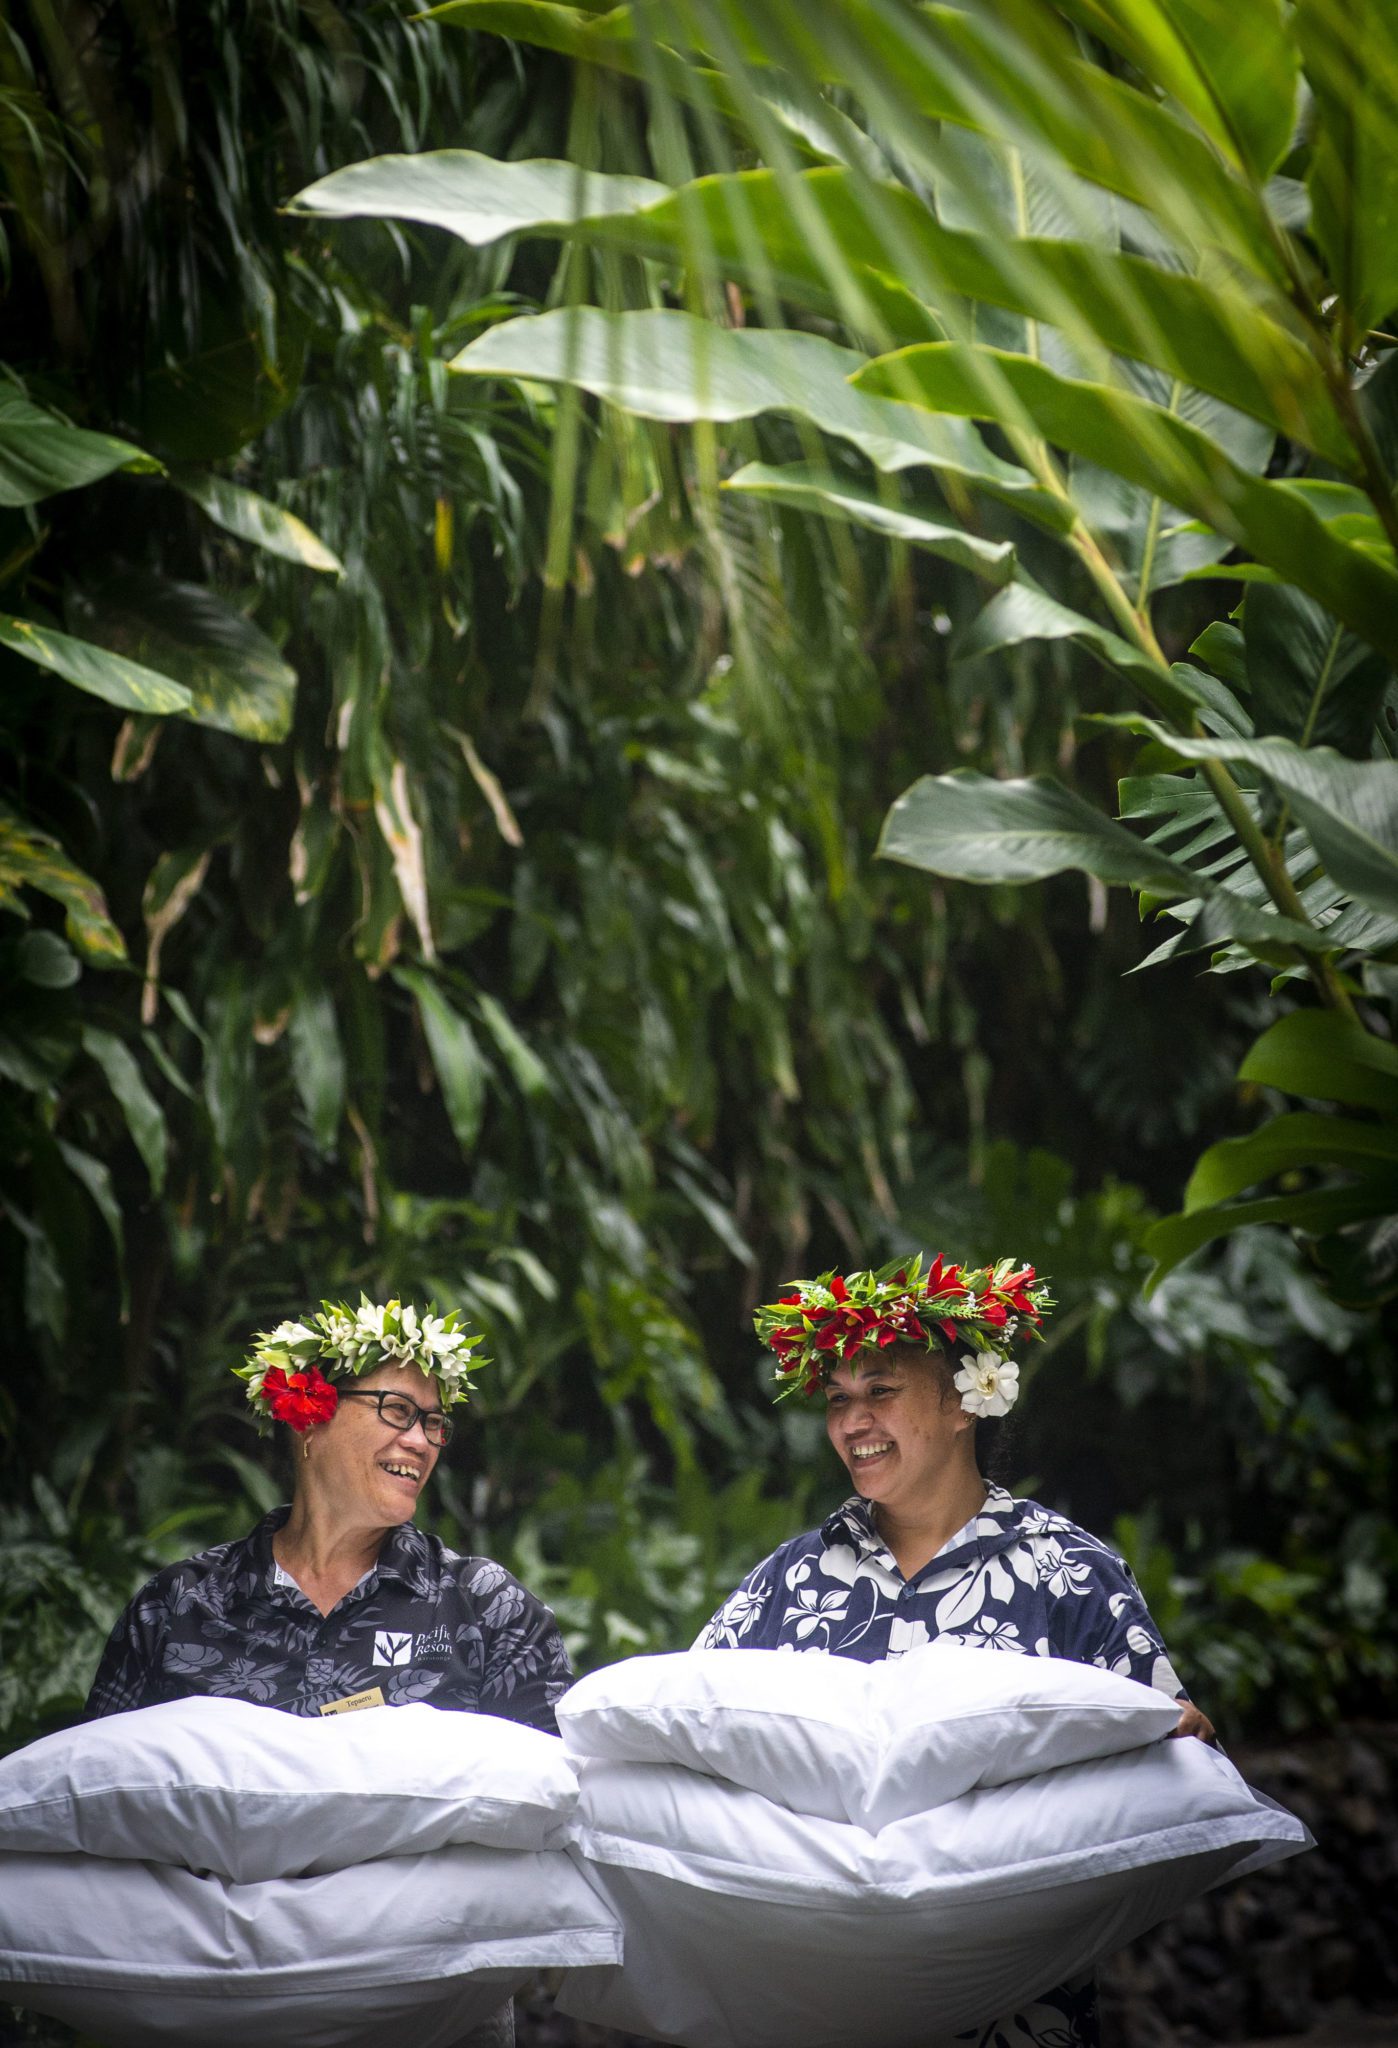 Image of hardworking Resort Attendants happily performing daily routines wearing tropical head eis or tiaras with flowers behind their ear that symbolizes peace and happiness